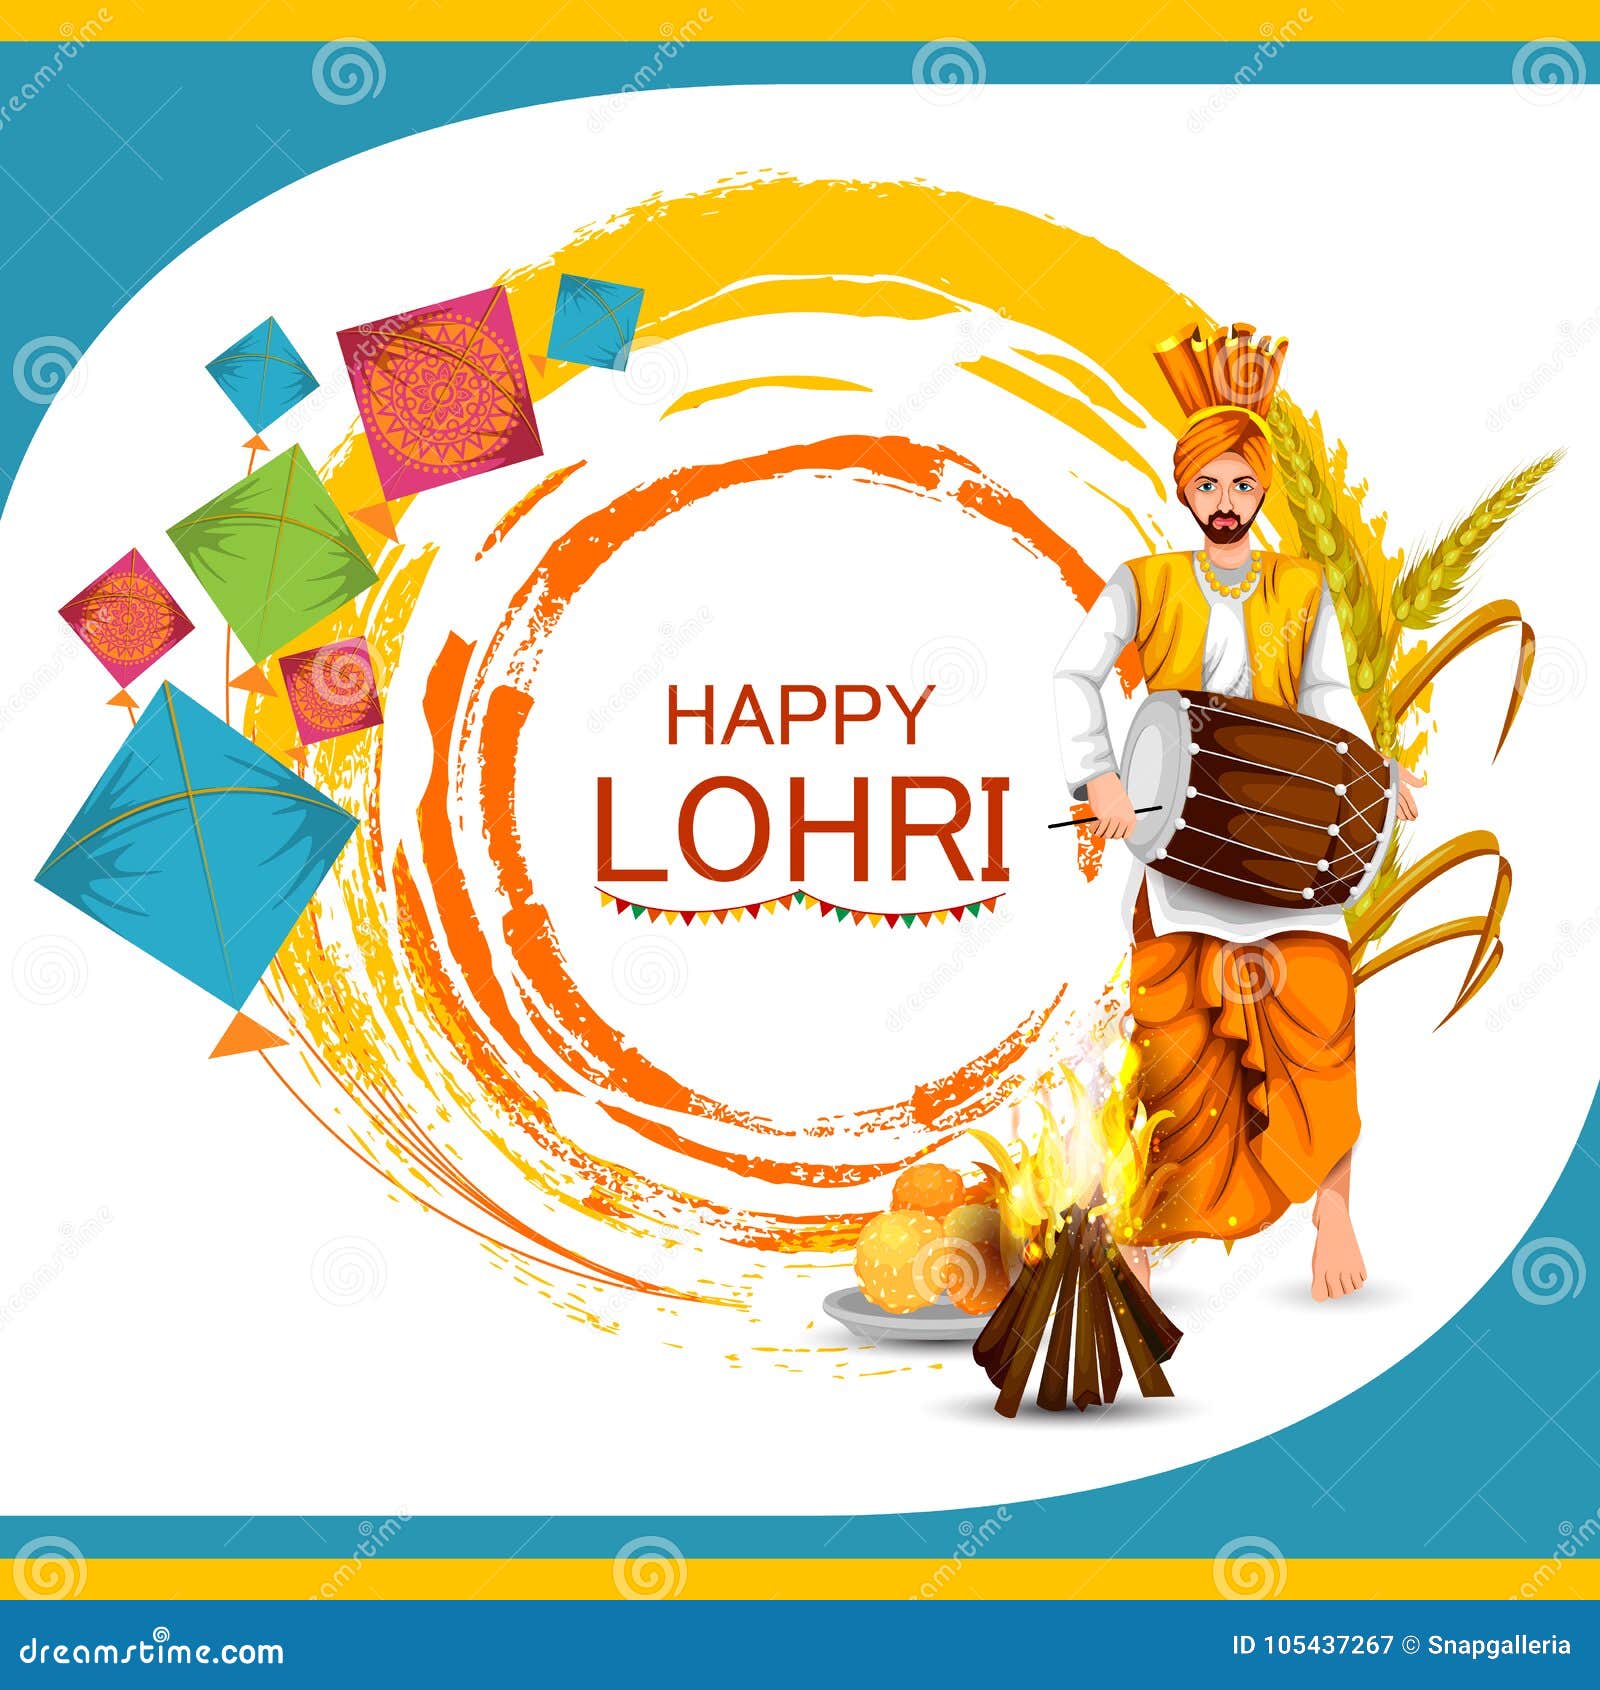 Happy Lohri Festival of Punjab India Background Stock Vector - Illustration  of agricultural, bhangra: 105437267